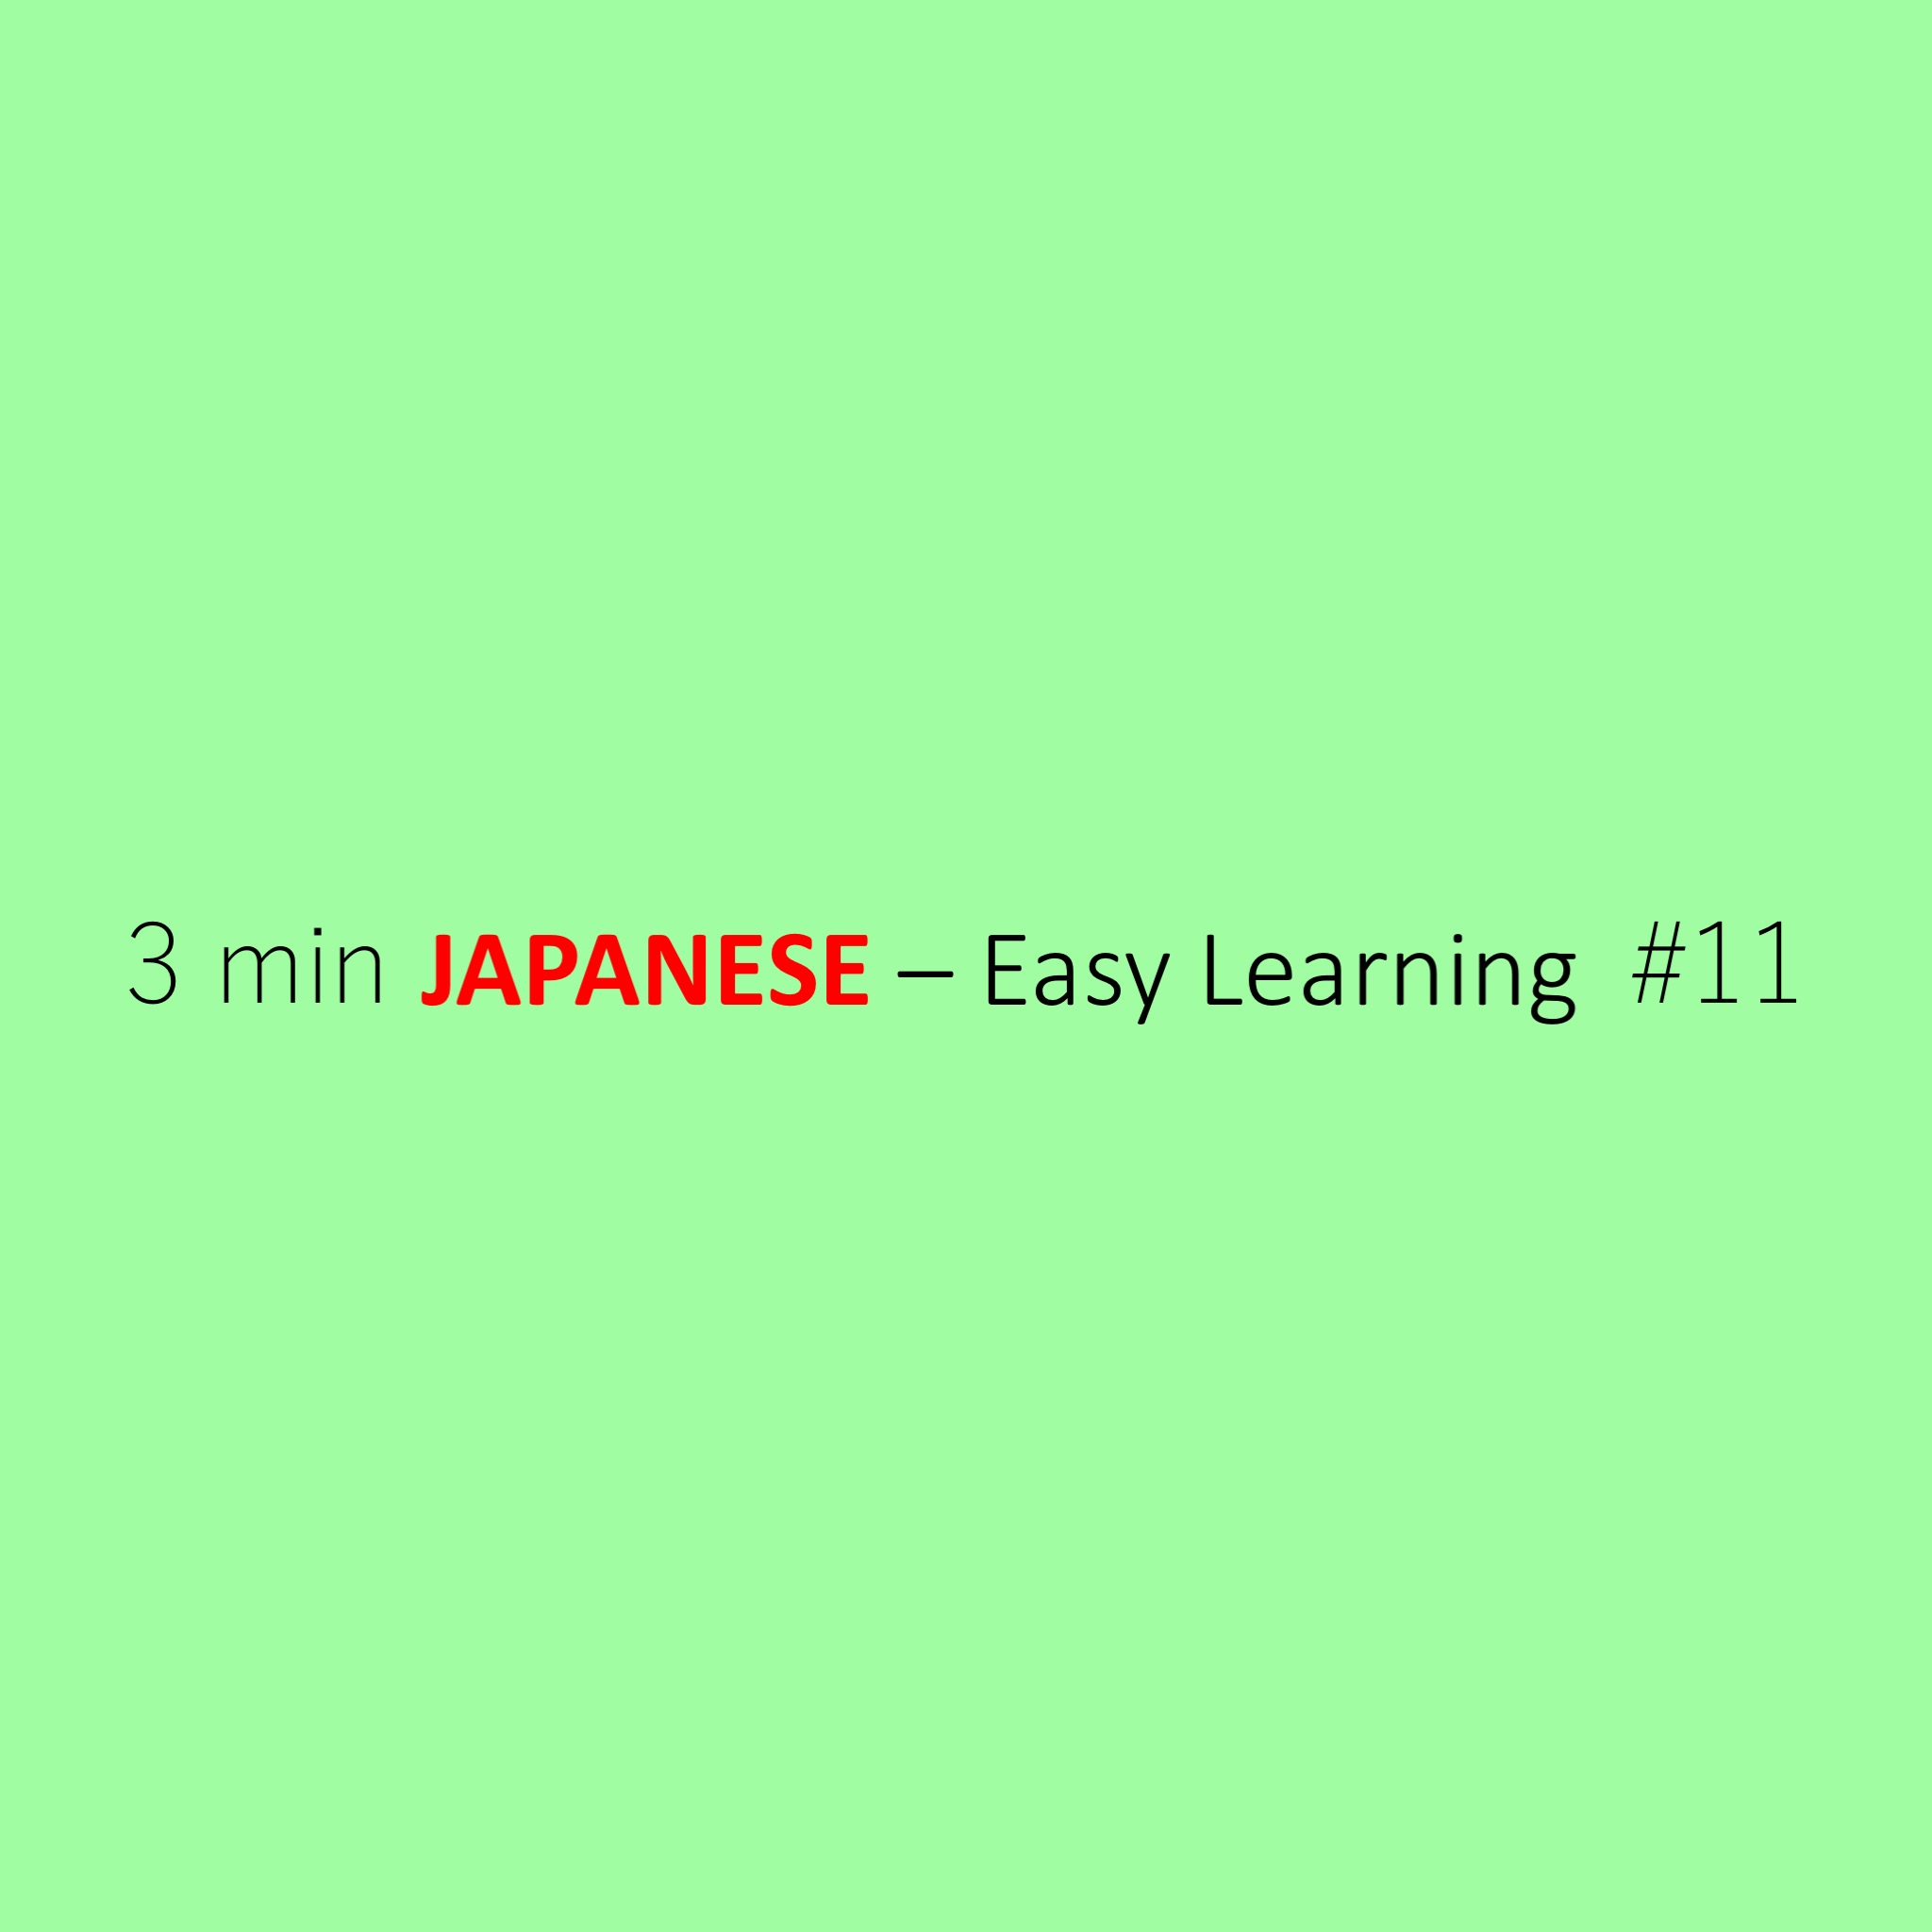 How to Order [3 min JAPANESE #11 – Easy Learning] | 100% PURE JAPAN